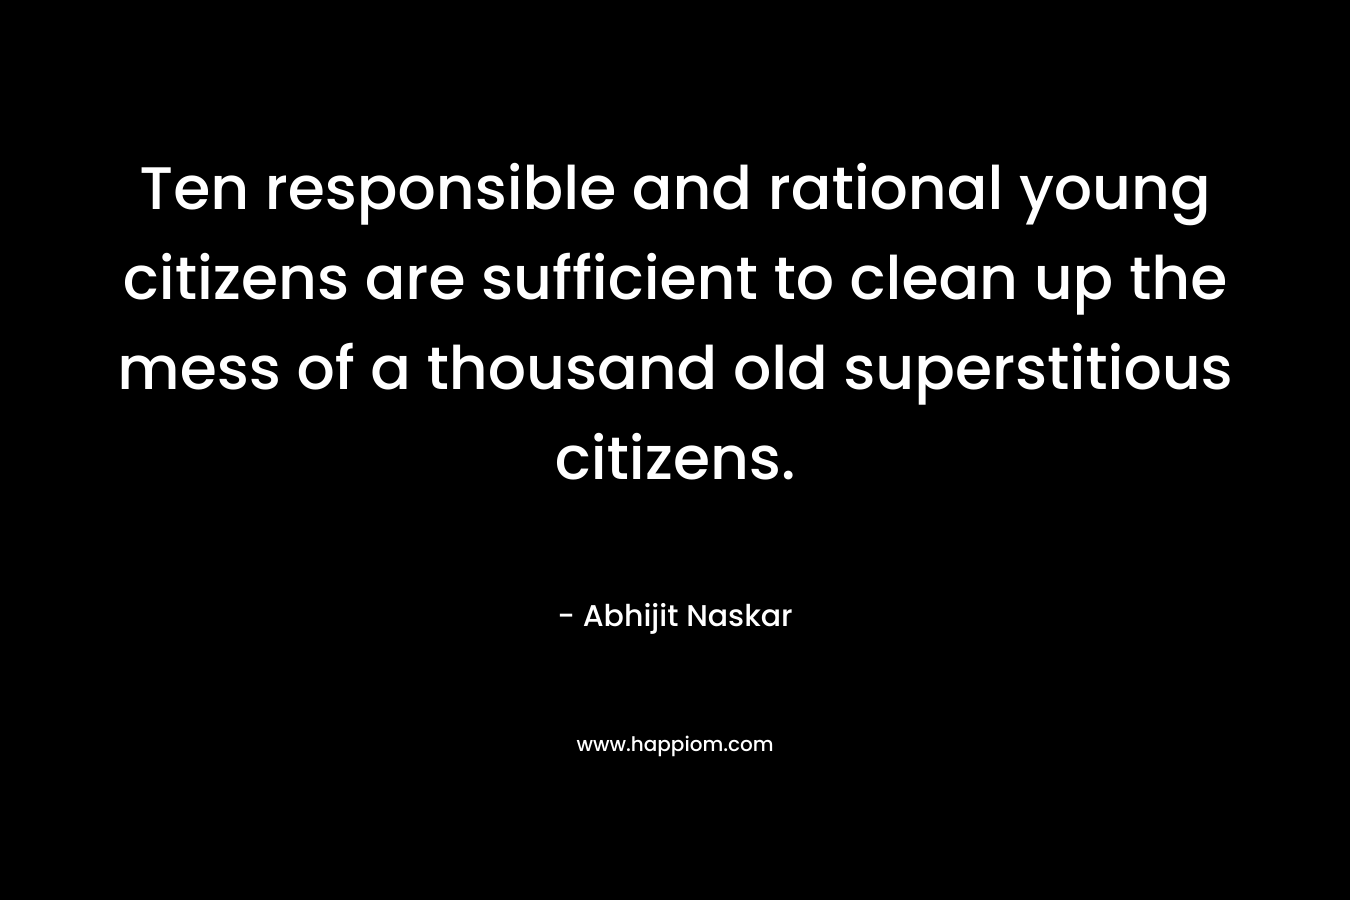 Ten responsible and rational young citizens are sufficient to clean up the mess of a thousand old superstitious citizens.